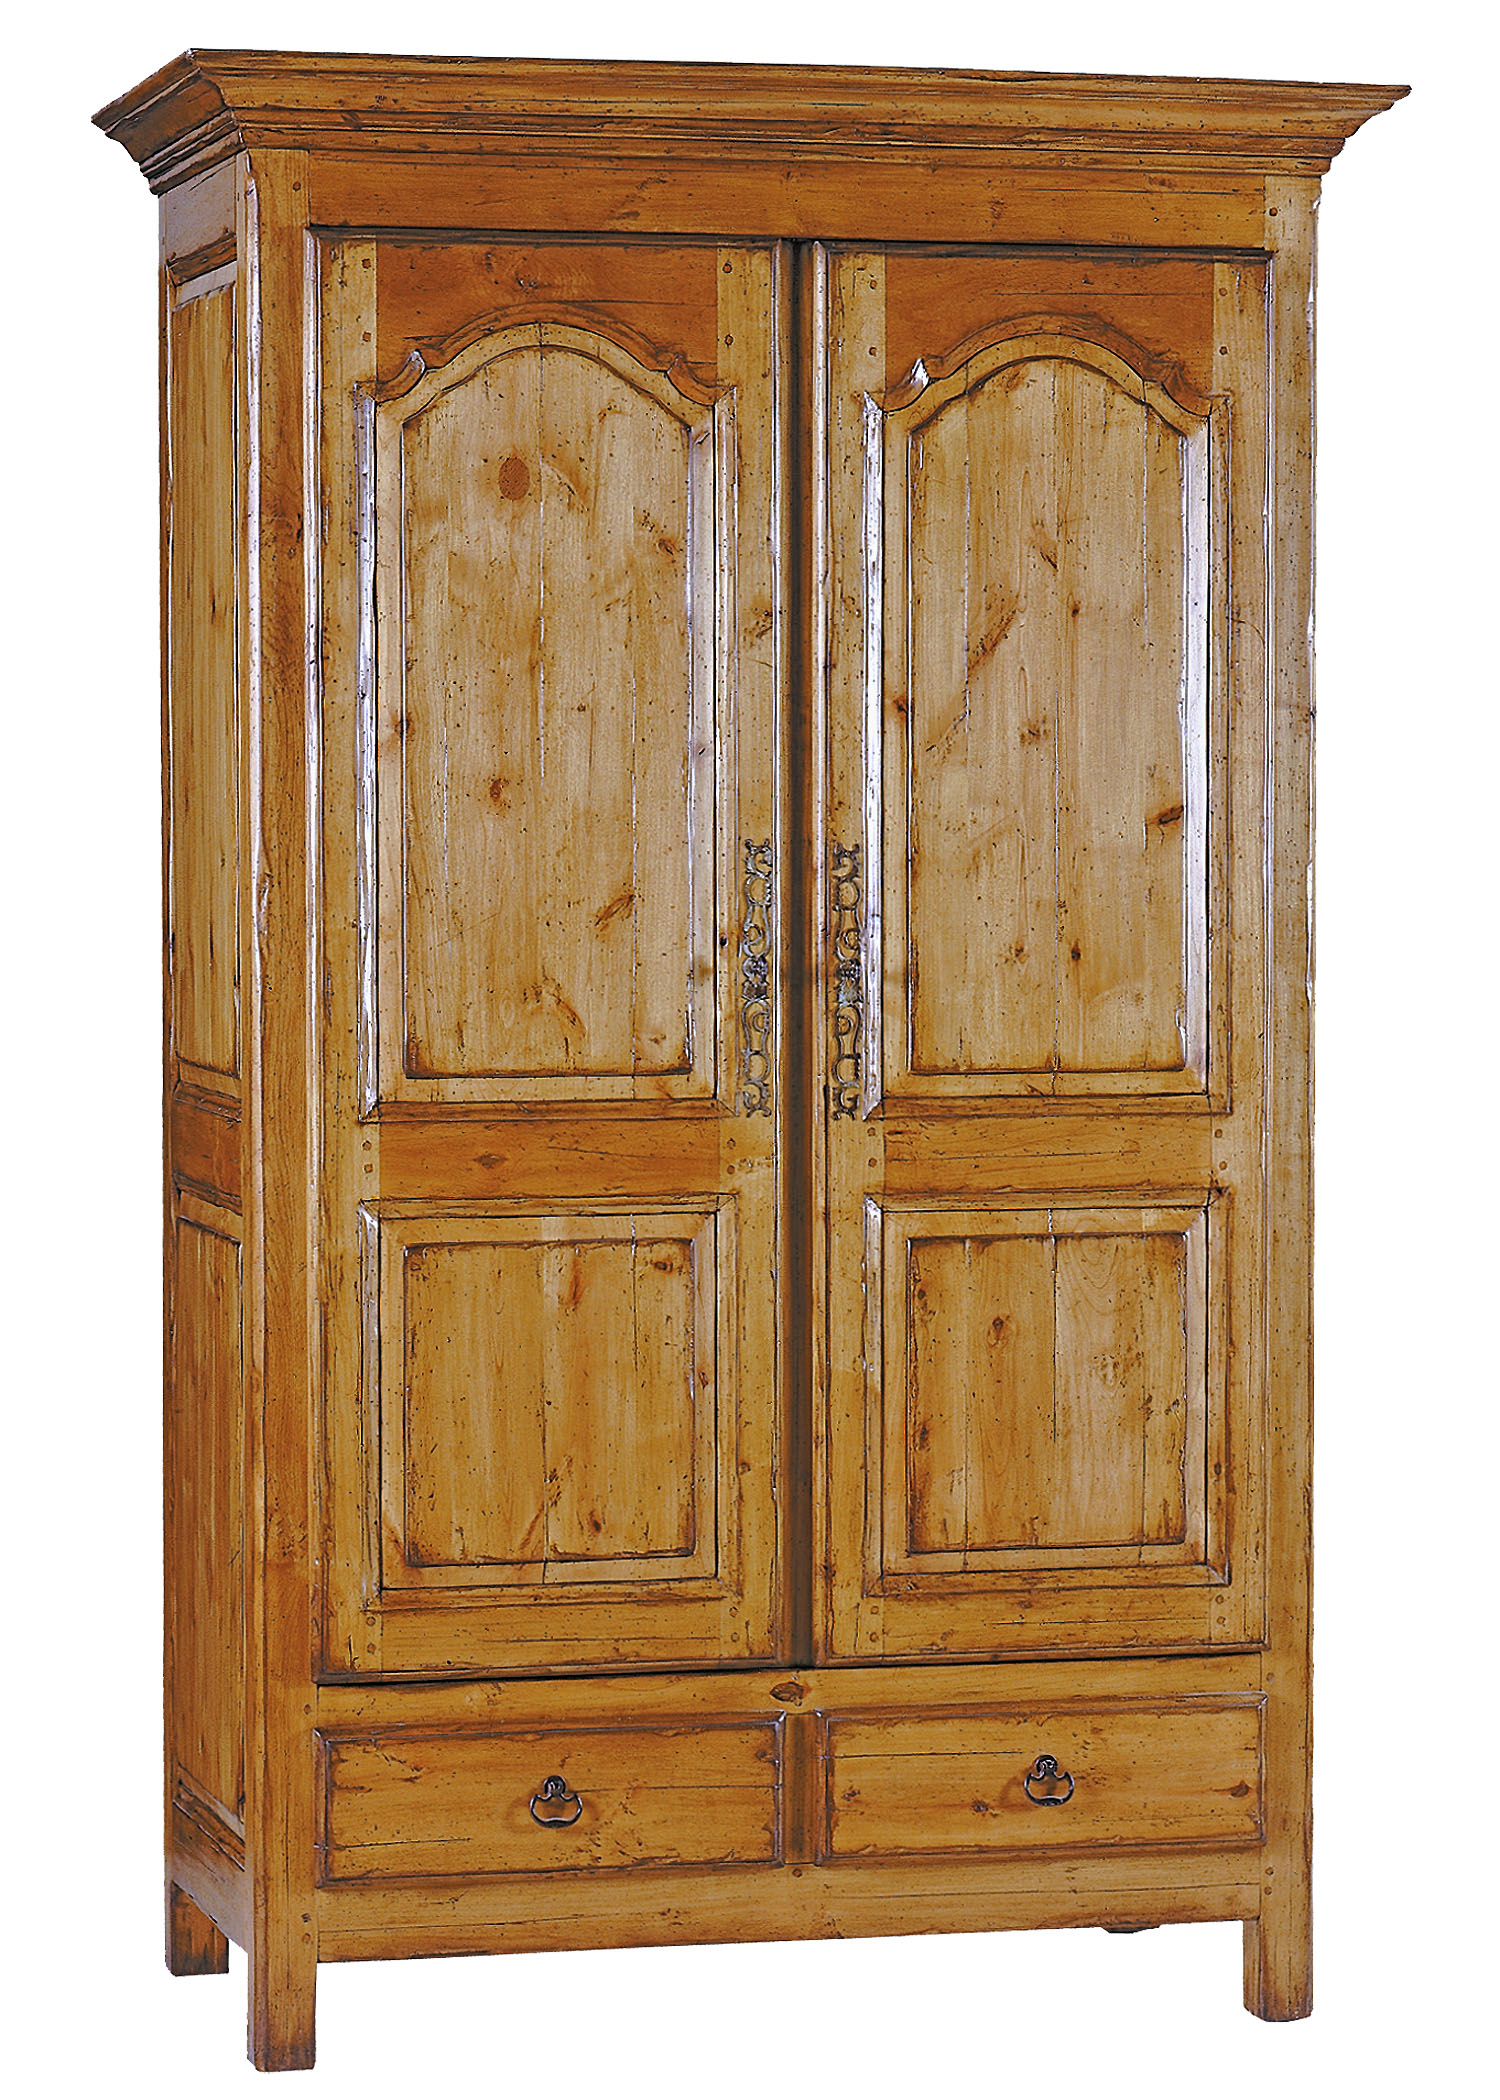 Crawford traditional stained or painted armoire cabinet by Woodland furniture